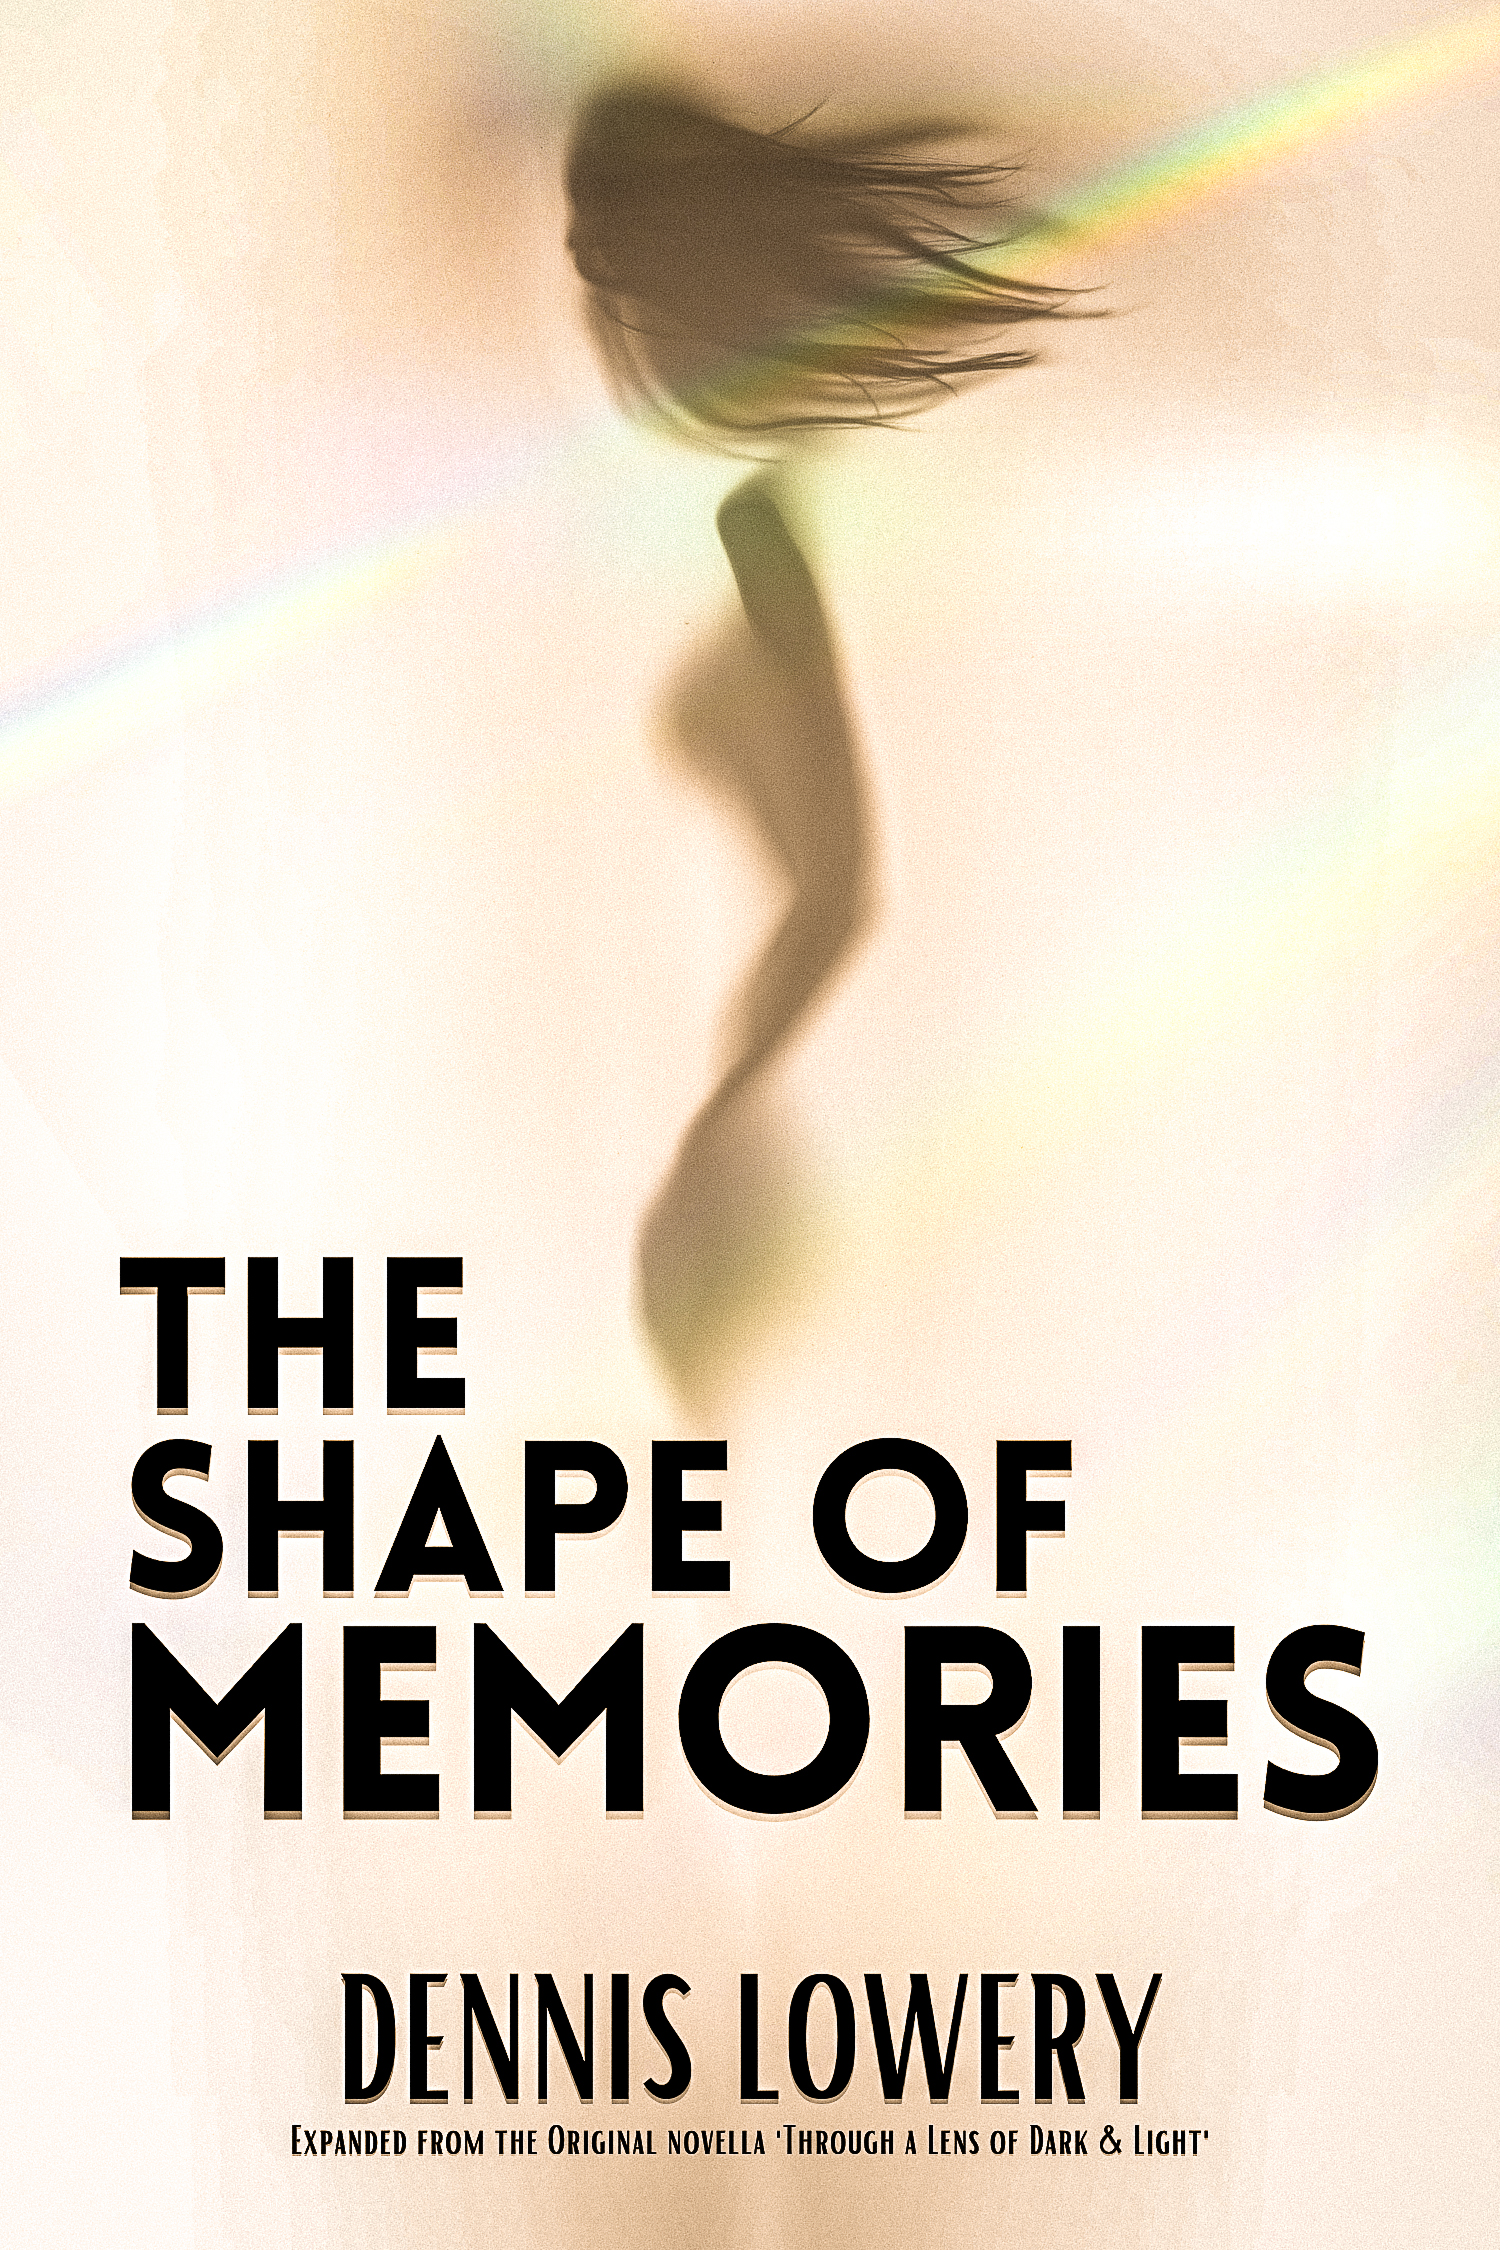 THE SHAPE OF MEMORIES - A Novella from Dennis Lowery